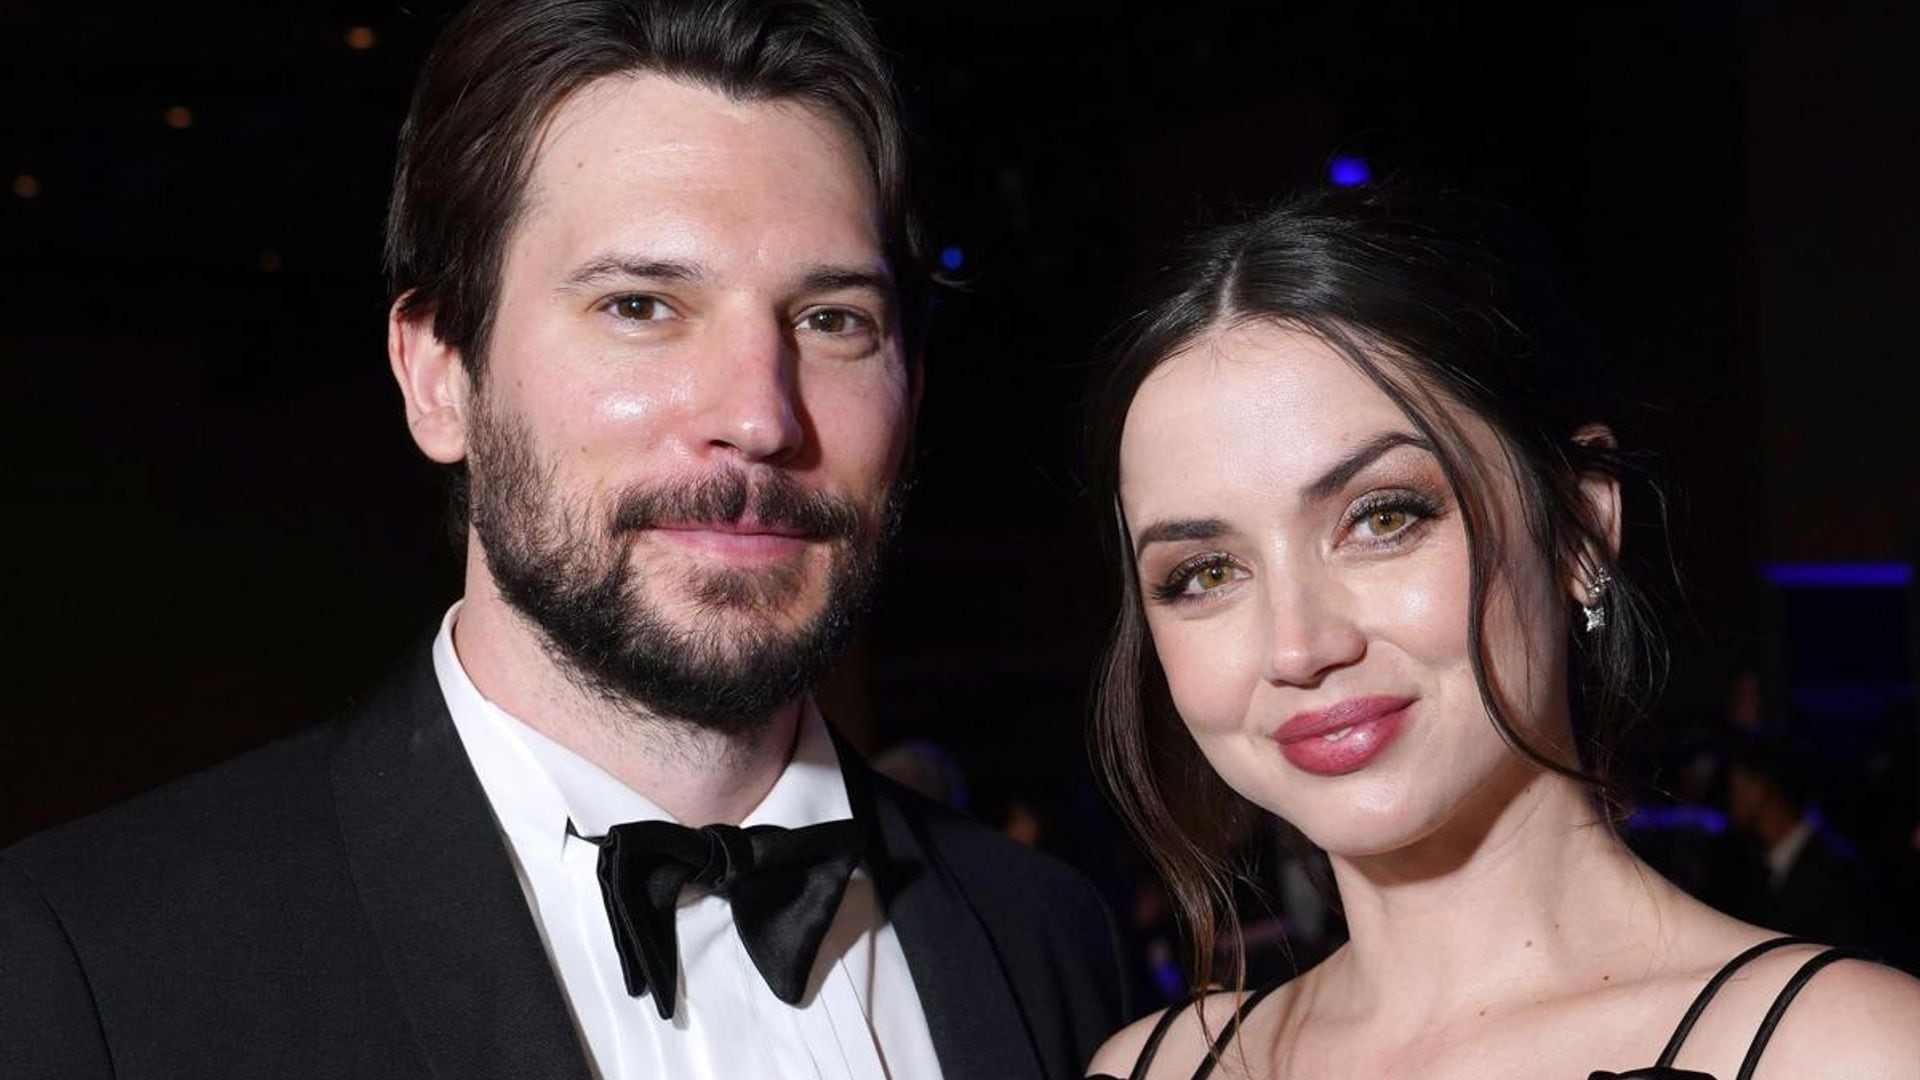 Ana de Armas and her boyfriend attend the SAG Awards together